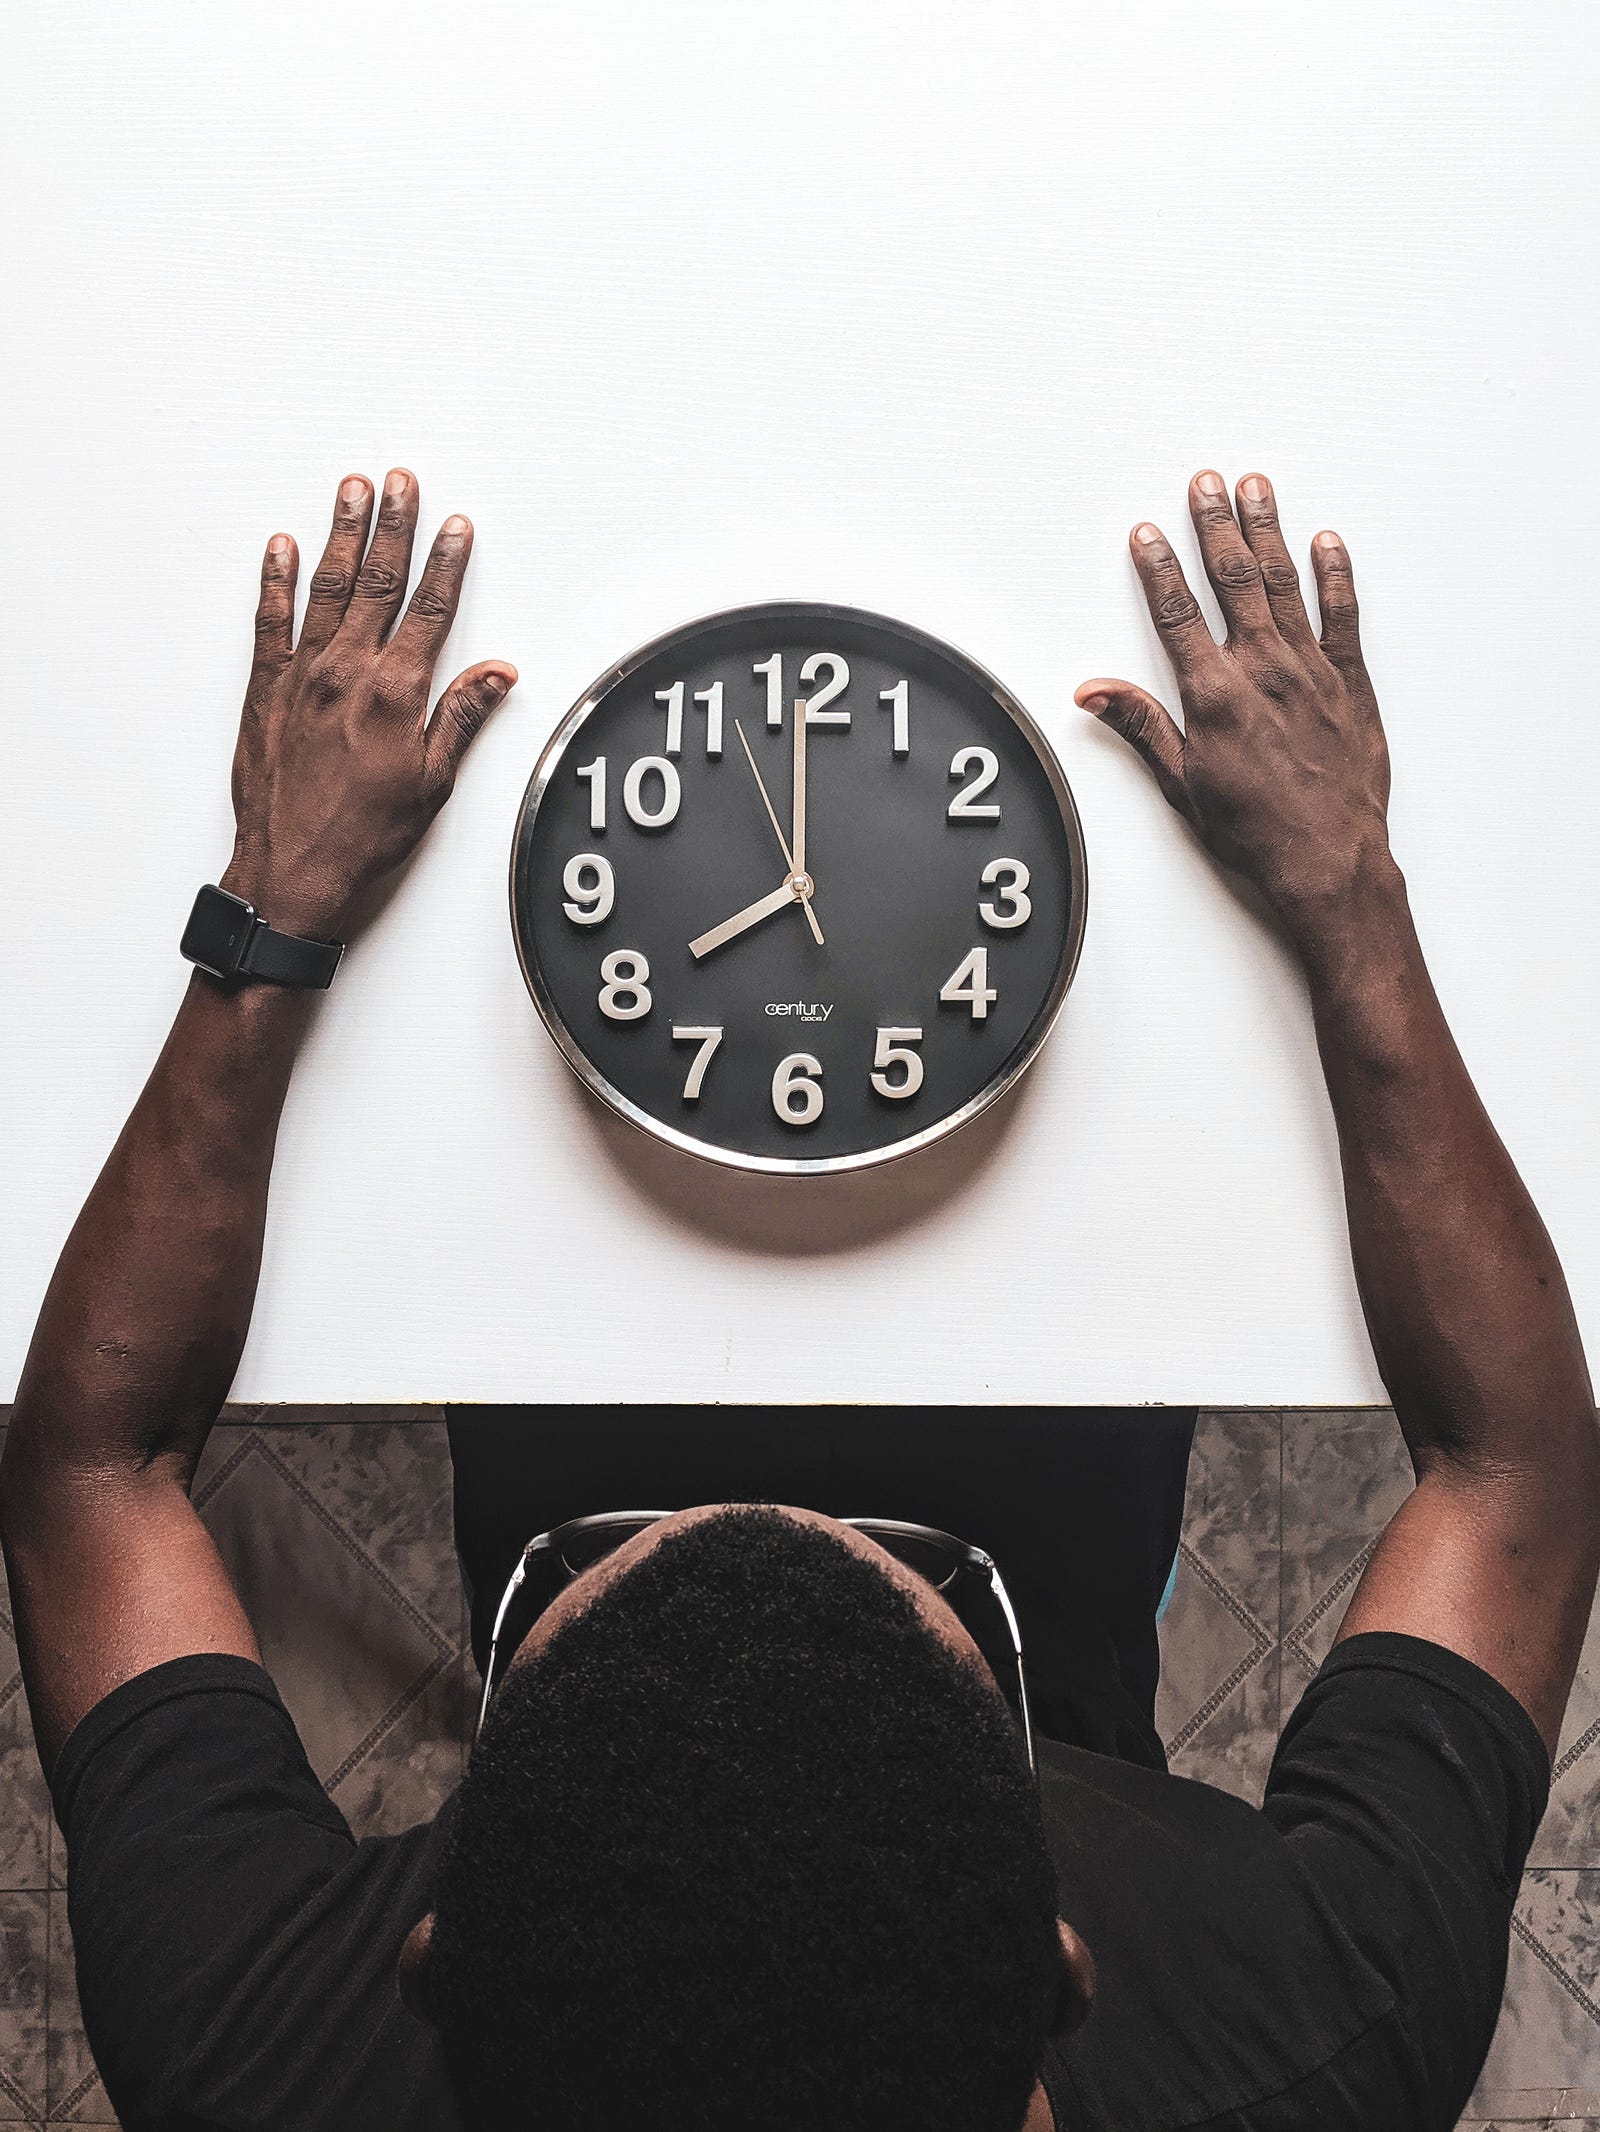 A clock with a black face *and white numbers and hands) sits on a white table. A person extends their arms around the clock. Why might vaccination effectiveness be linked to the time of day? Researchers think that the circadian rhythm — 24-hour cycles that are part of the body’s internal clock, running in the background to carry out essential functions and processes — affects the body’s response to the vaccine.